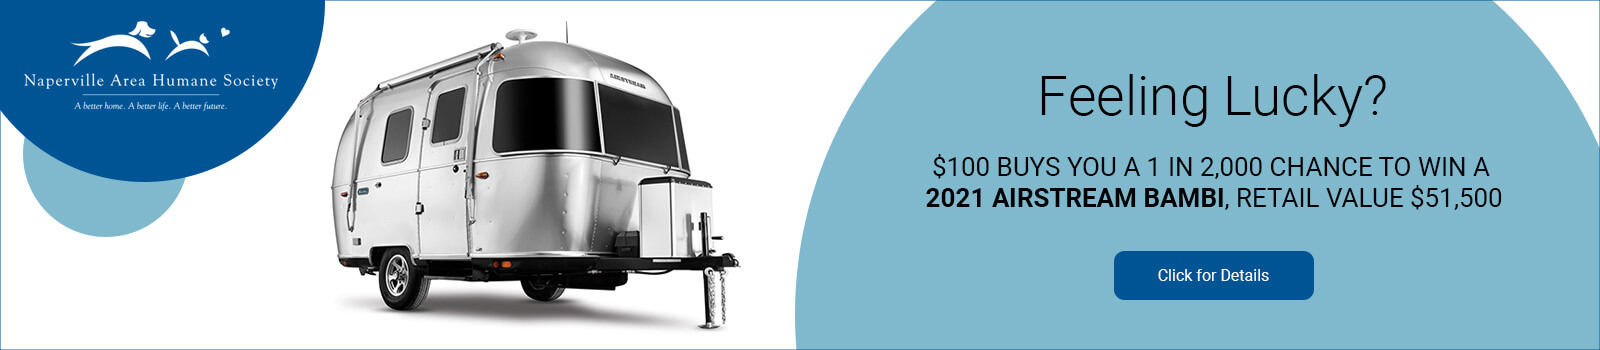 $100 BUYS YOU A 1 IN 2,000 CHANCE TO WIN A 2021 AIRSTREAM BAMBI, RETAIL VALUE $51,500 - click for details